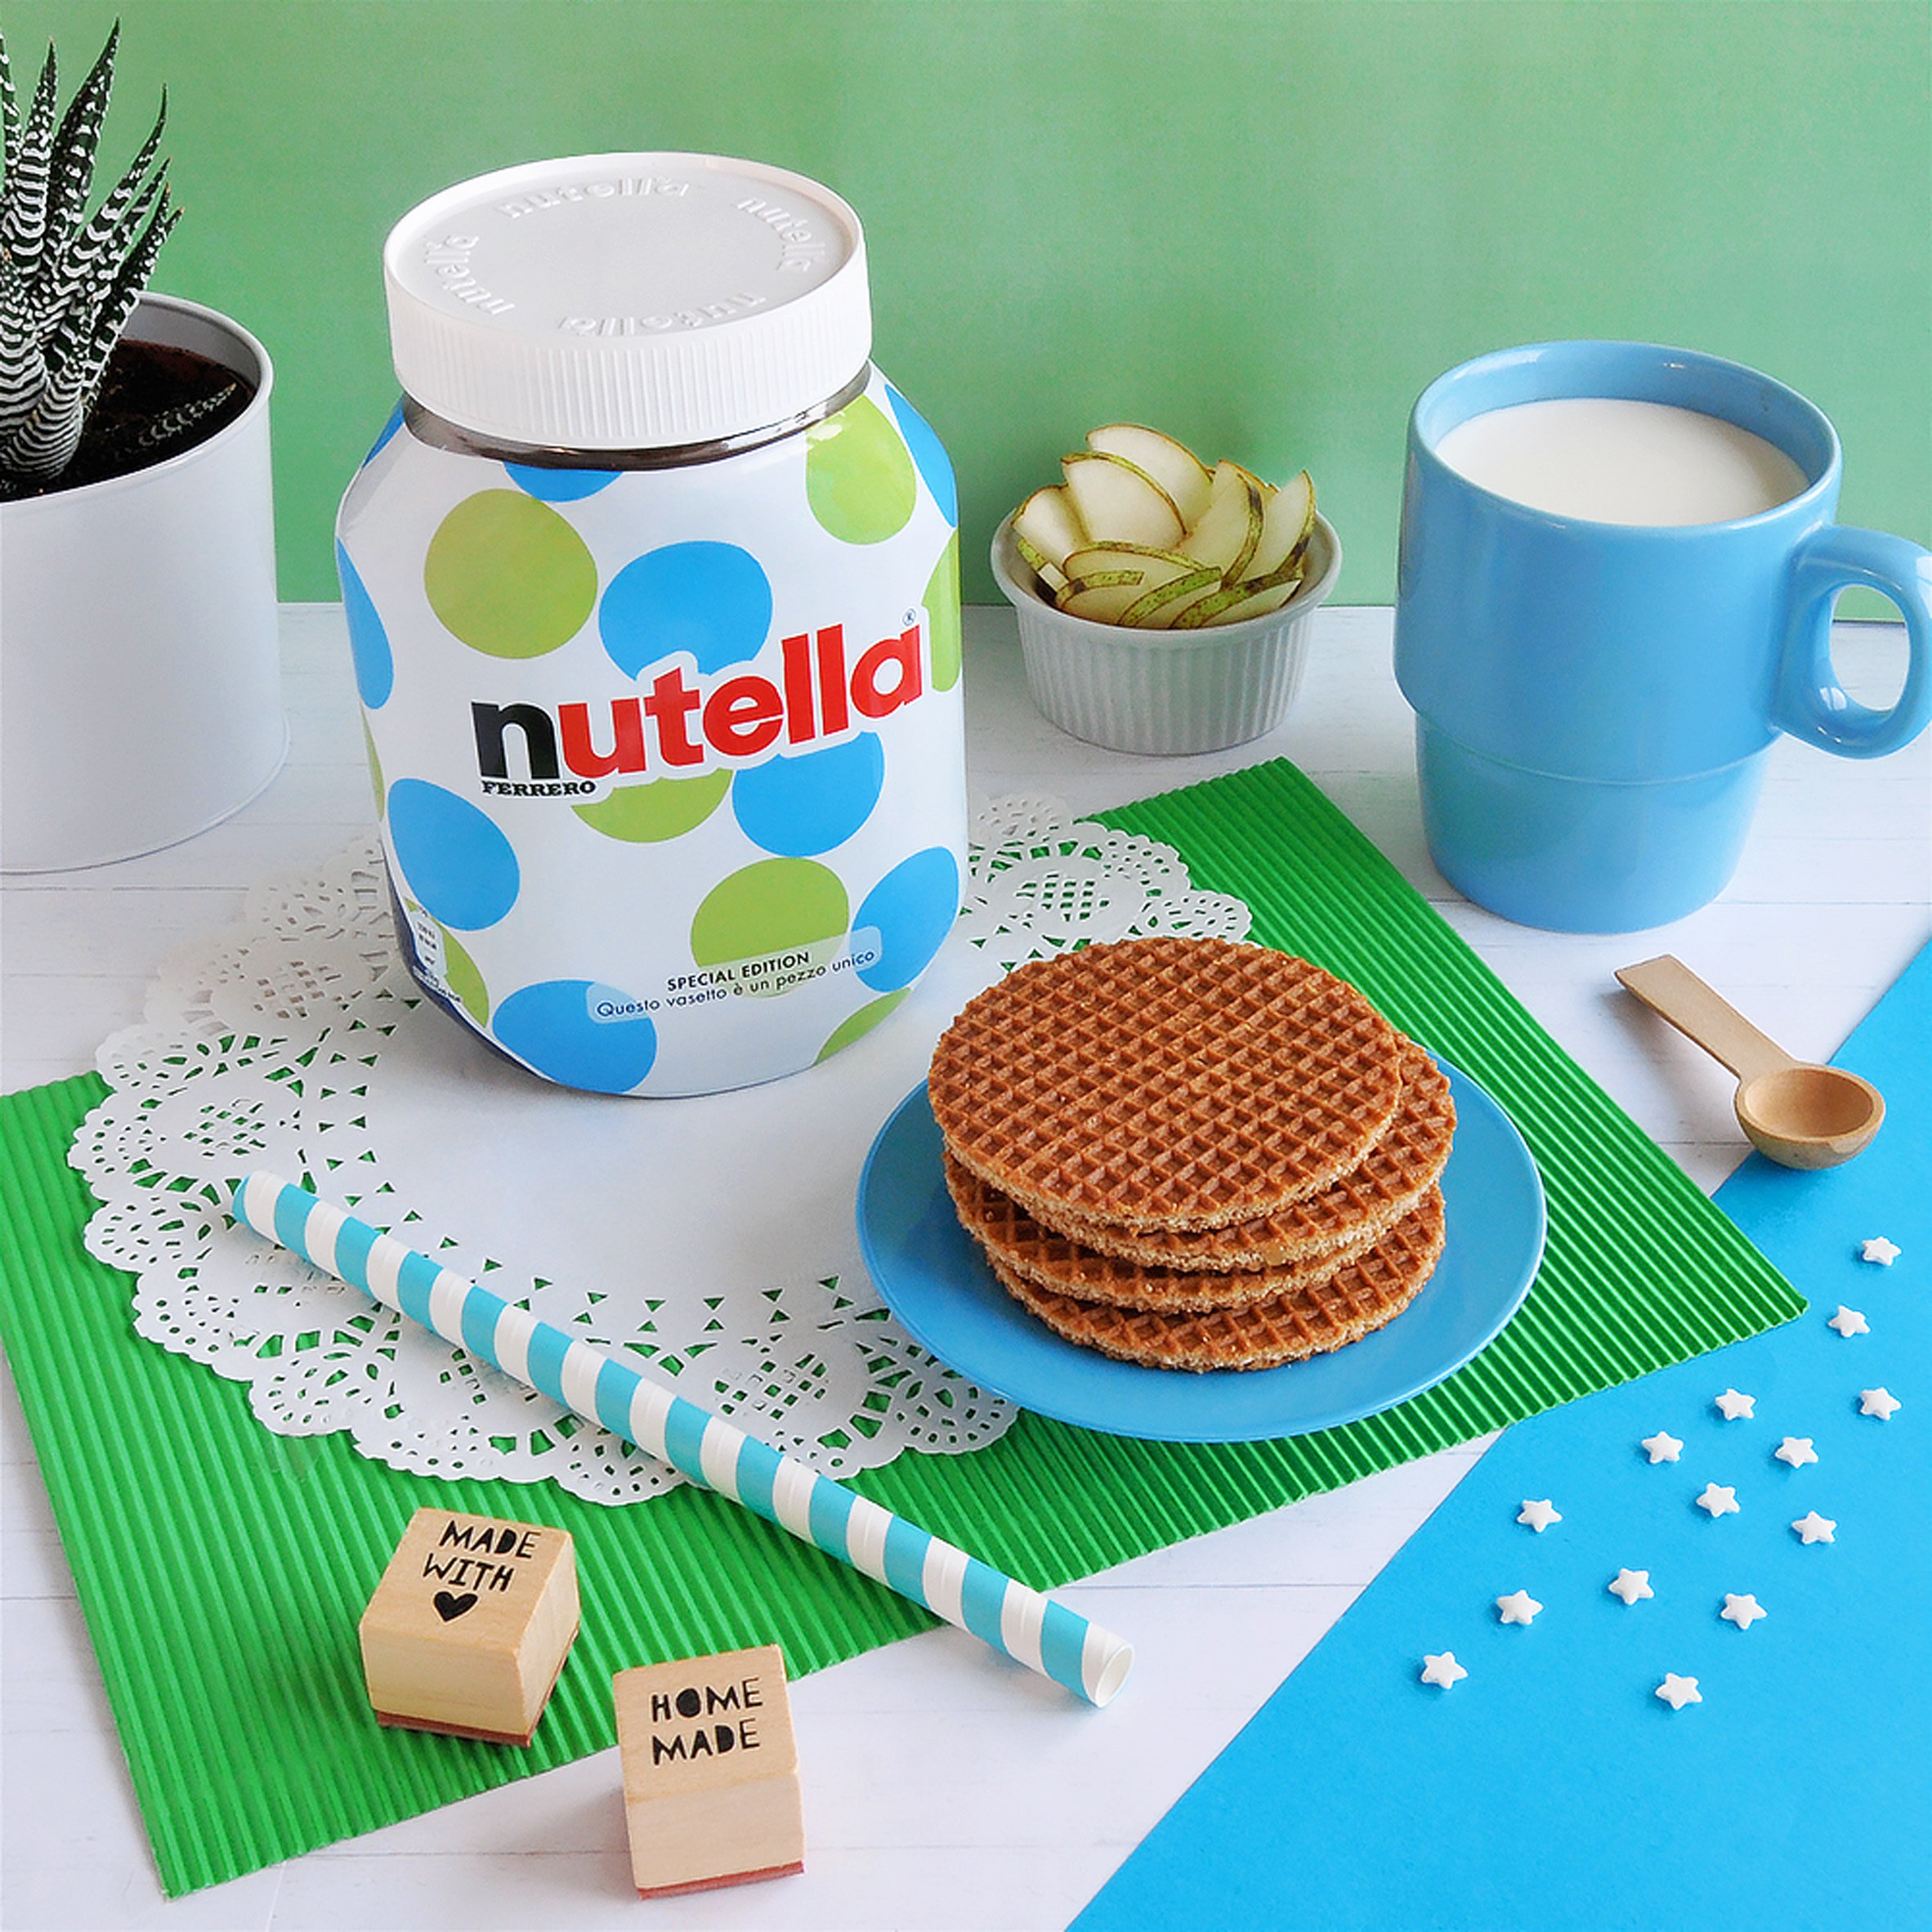 nutella-unica-packaging-design-products-_dezeen_2364_col_2.jpg